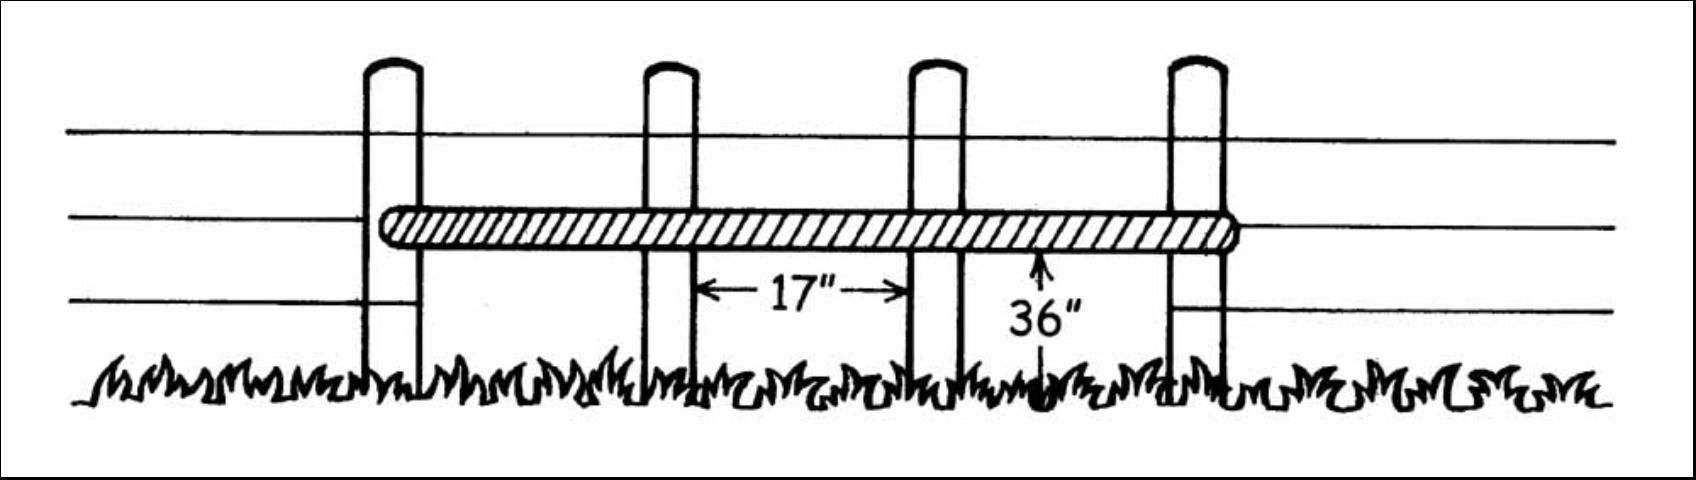 Figure 3. Simple post arrangement in conventional fence.